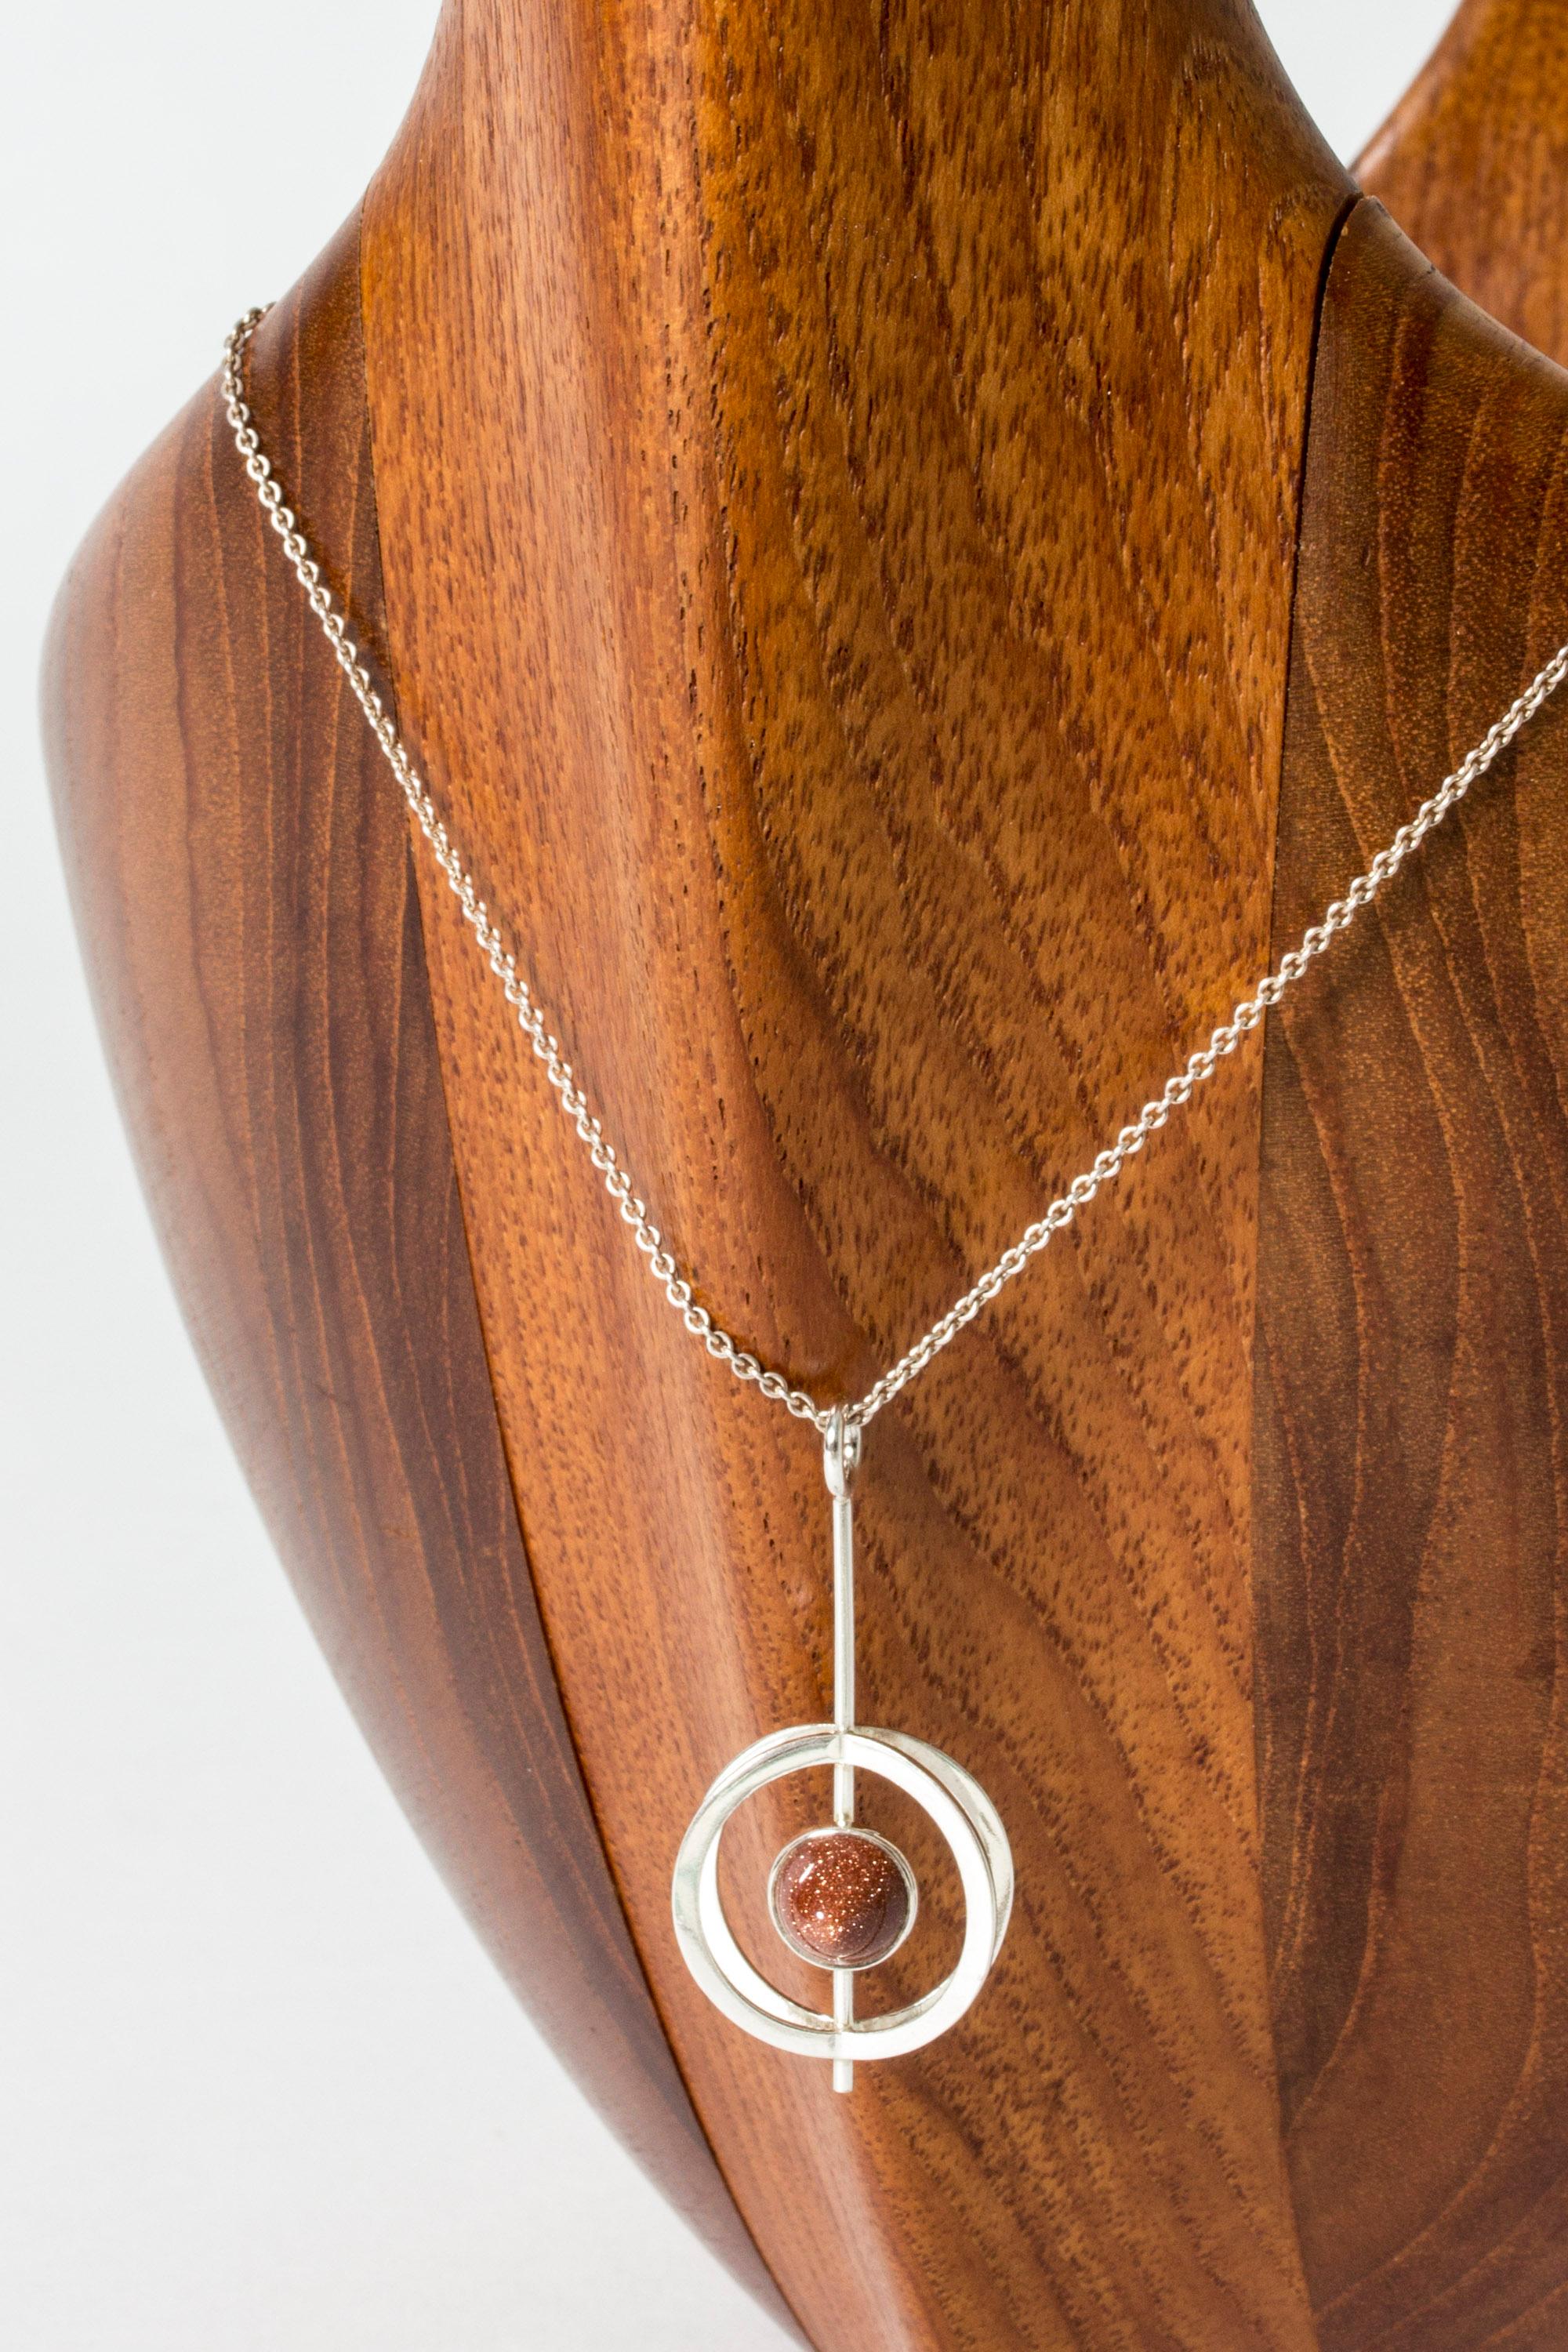 Beautiful silver pendant by Elis Kauppi, with a bullet cut goldstone in the middle. Open, graphic design that is striking while being a neat, easy to wear design.